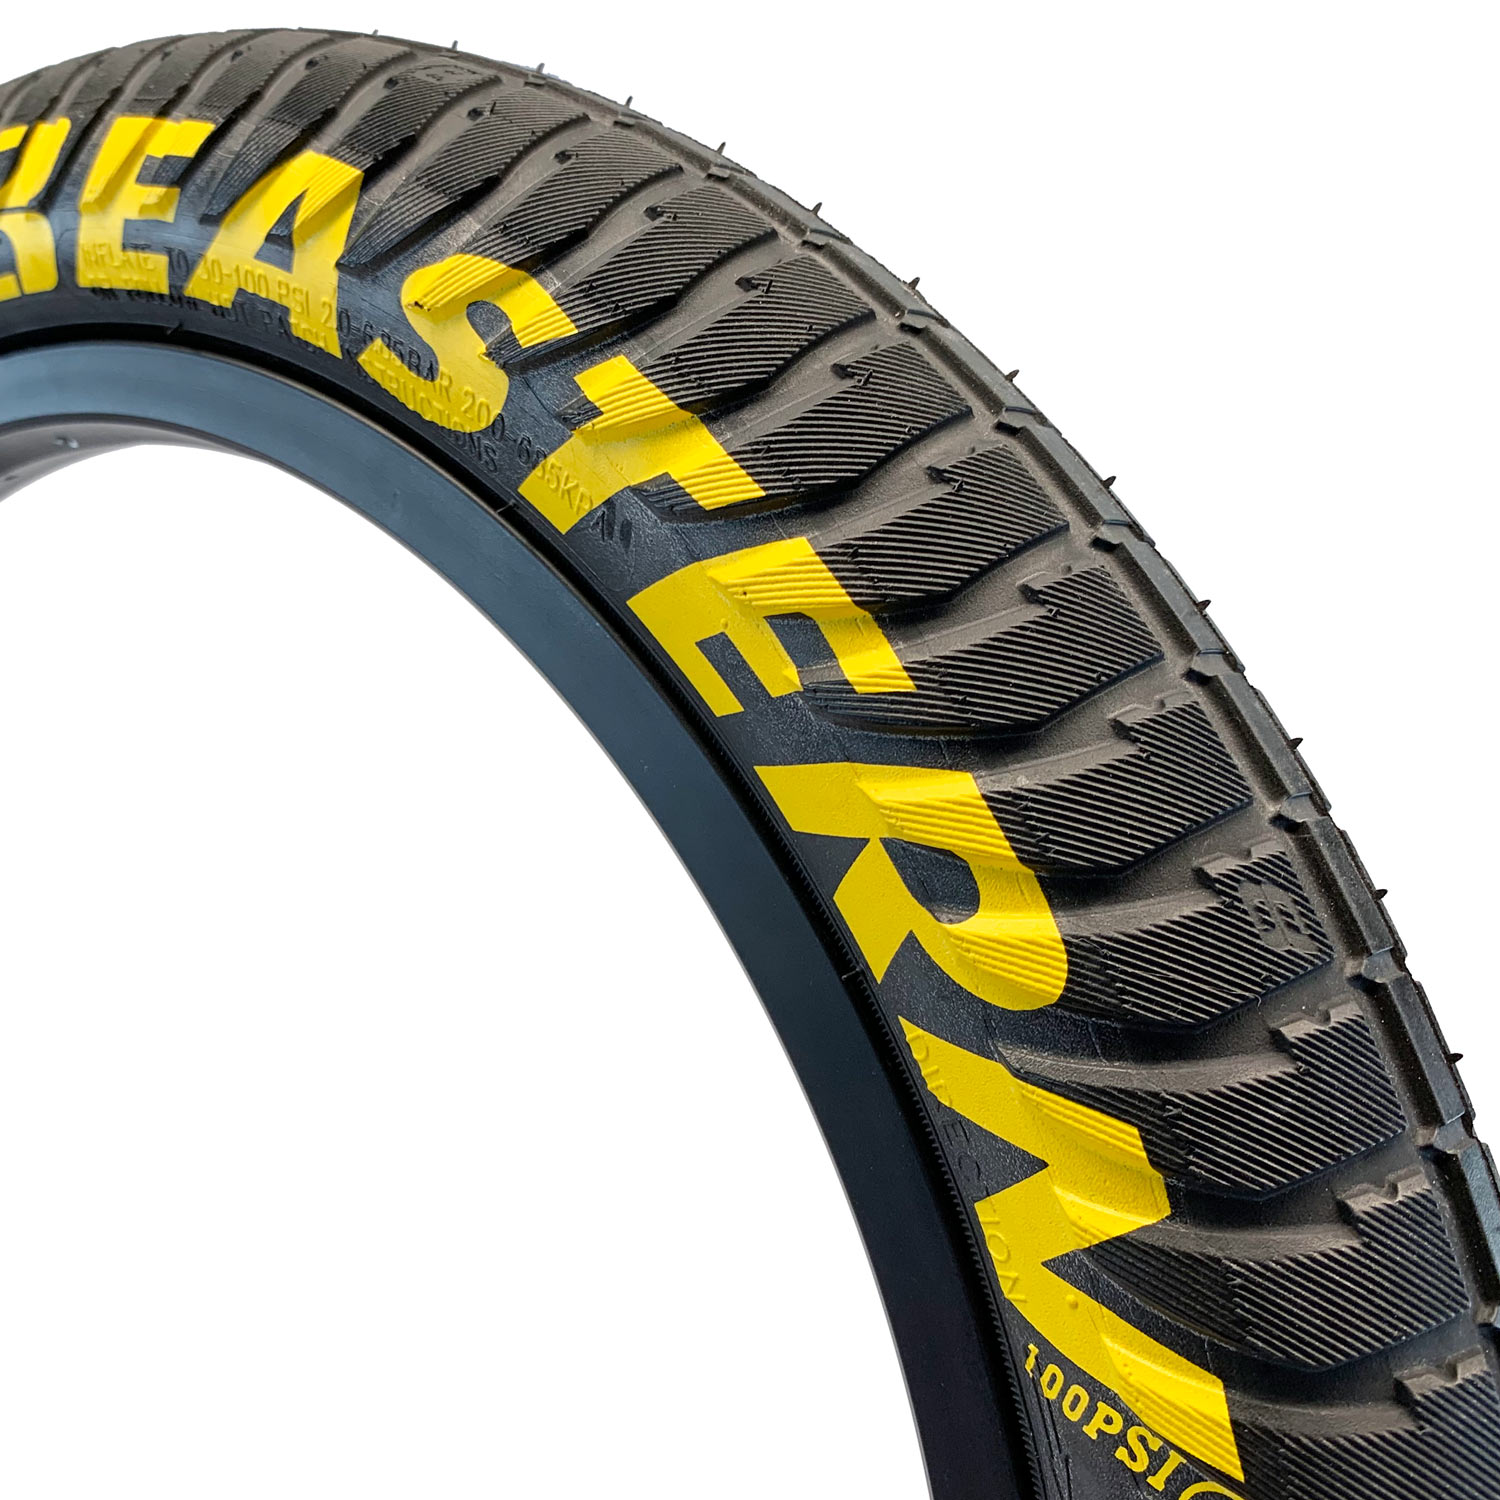 Curb Monkey Tires are back!